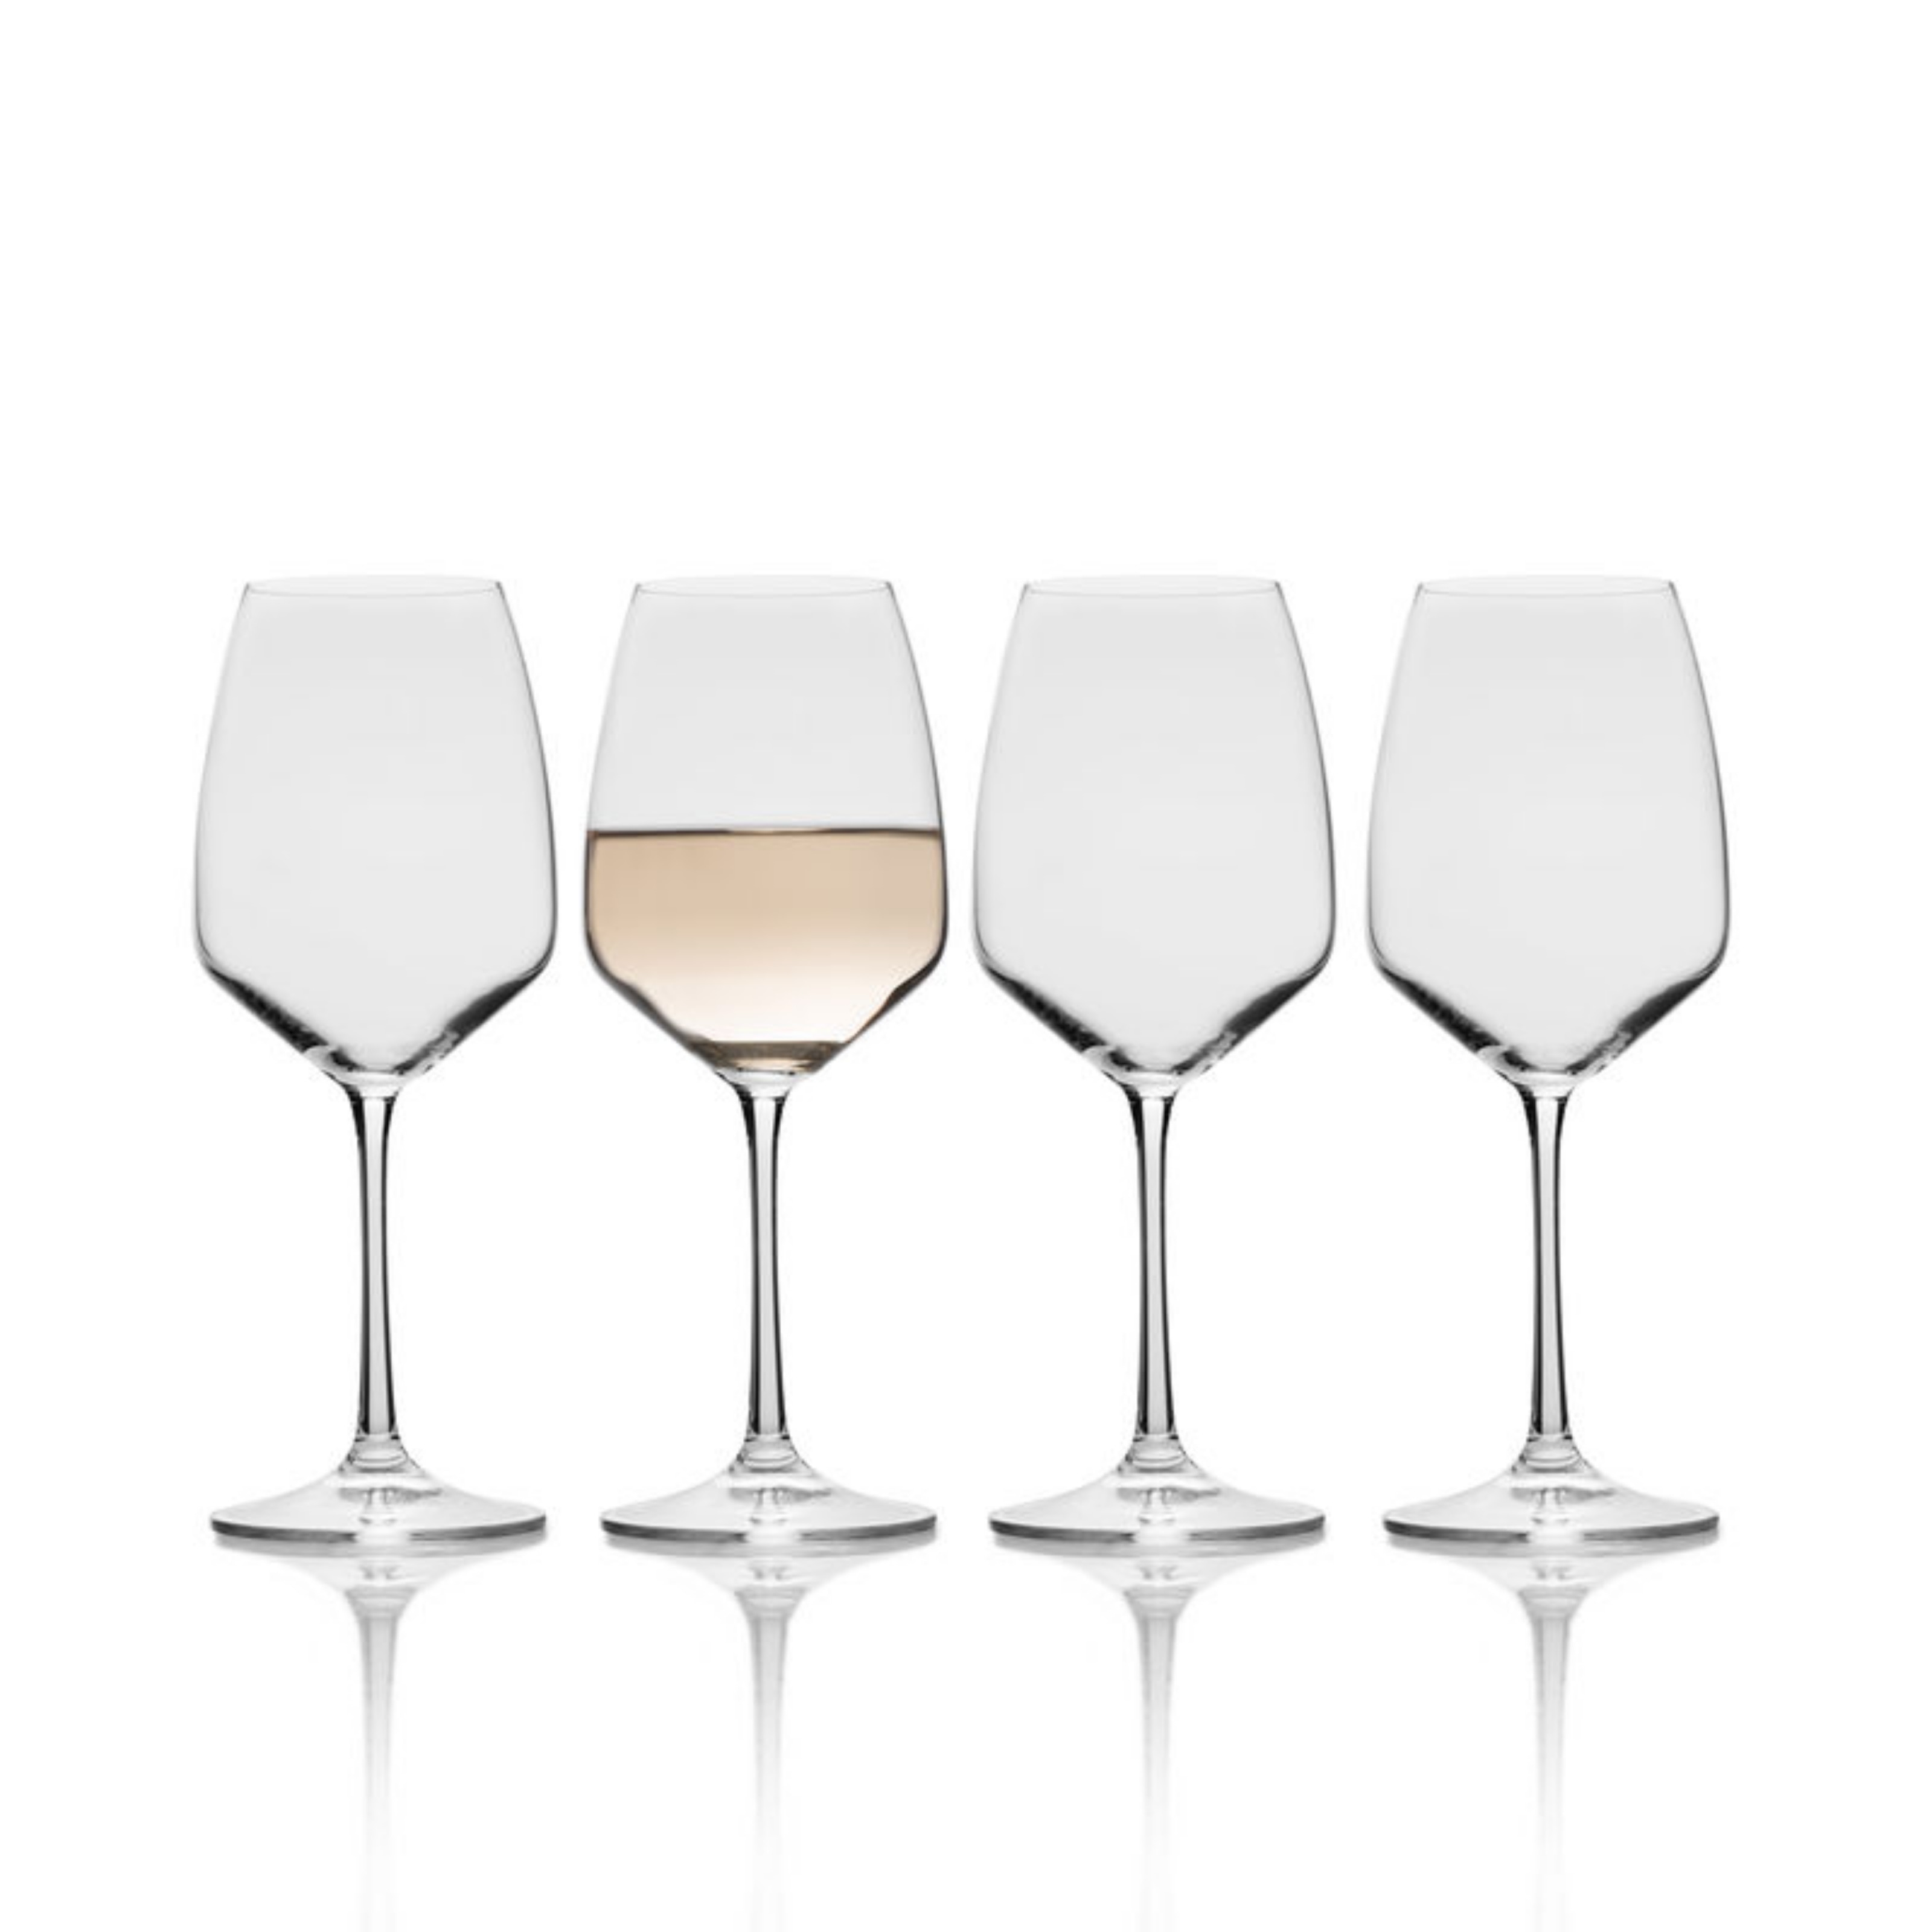 https://ak1.ostkcdn.com/images/products/is/images/direct/e1f560c195624c859b5cc429ba63b3404ddd7a9e/Mikasa-Melody-15OZ-White-Wine-Glass-%28Set-of-4%29.jpg